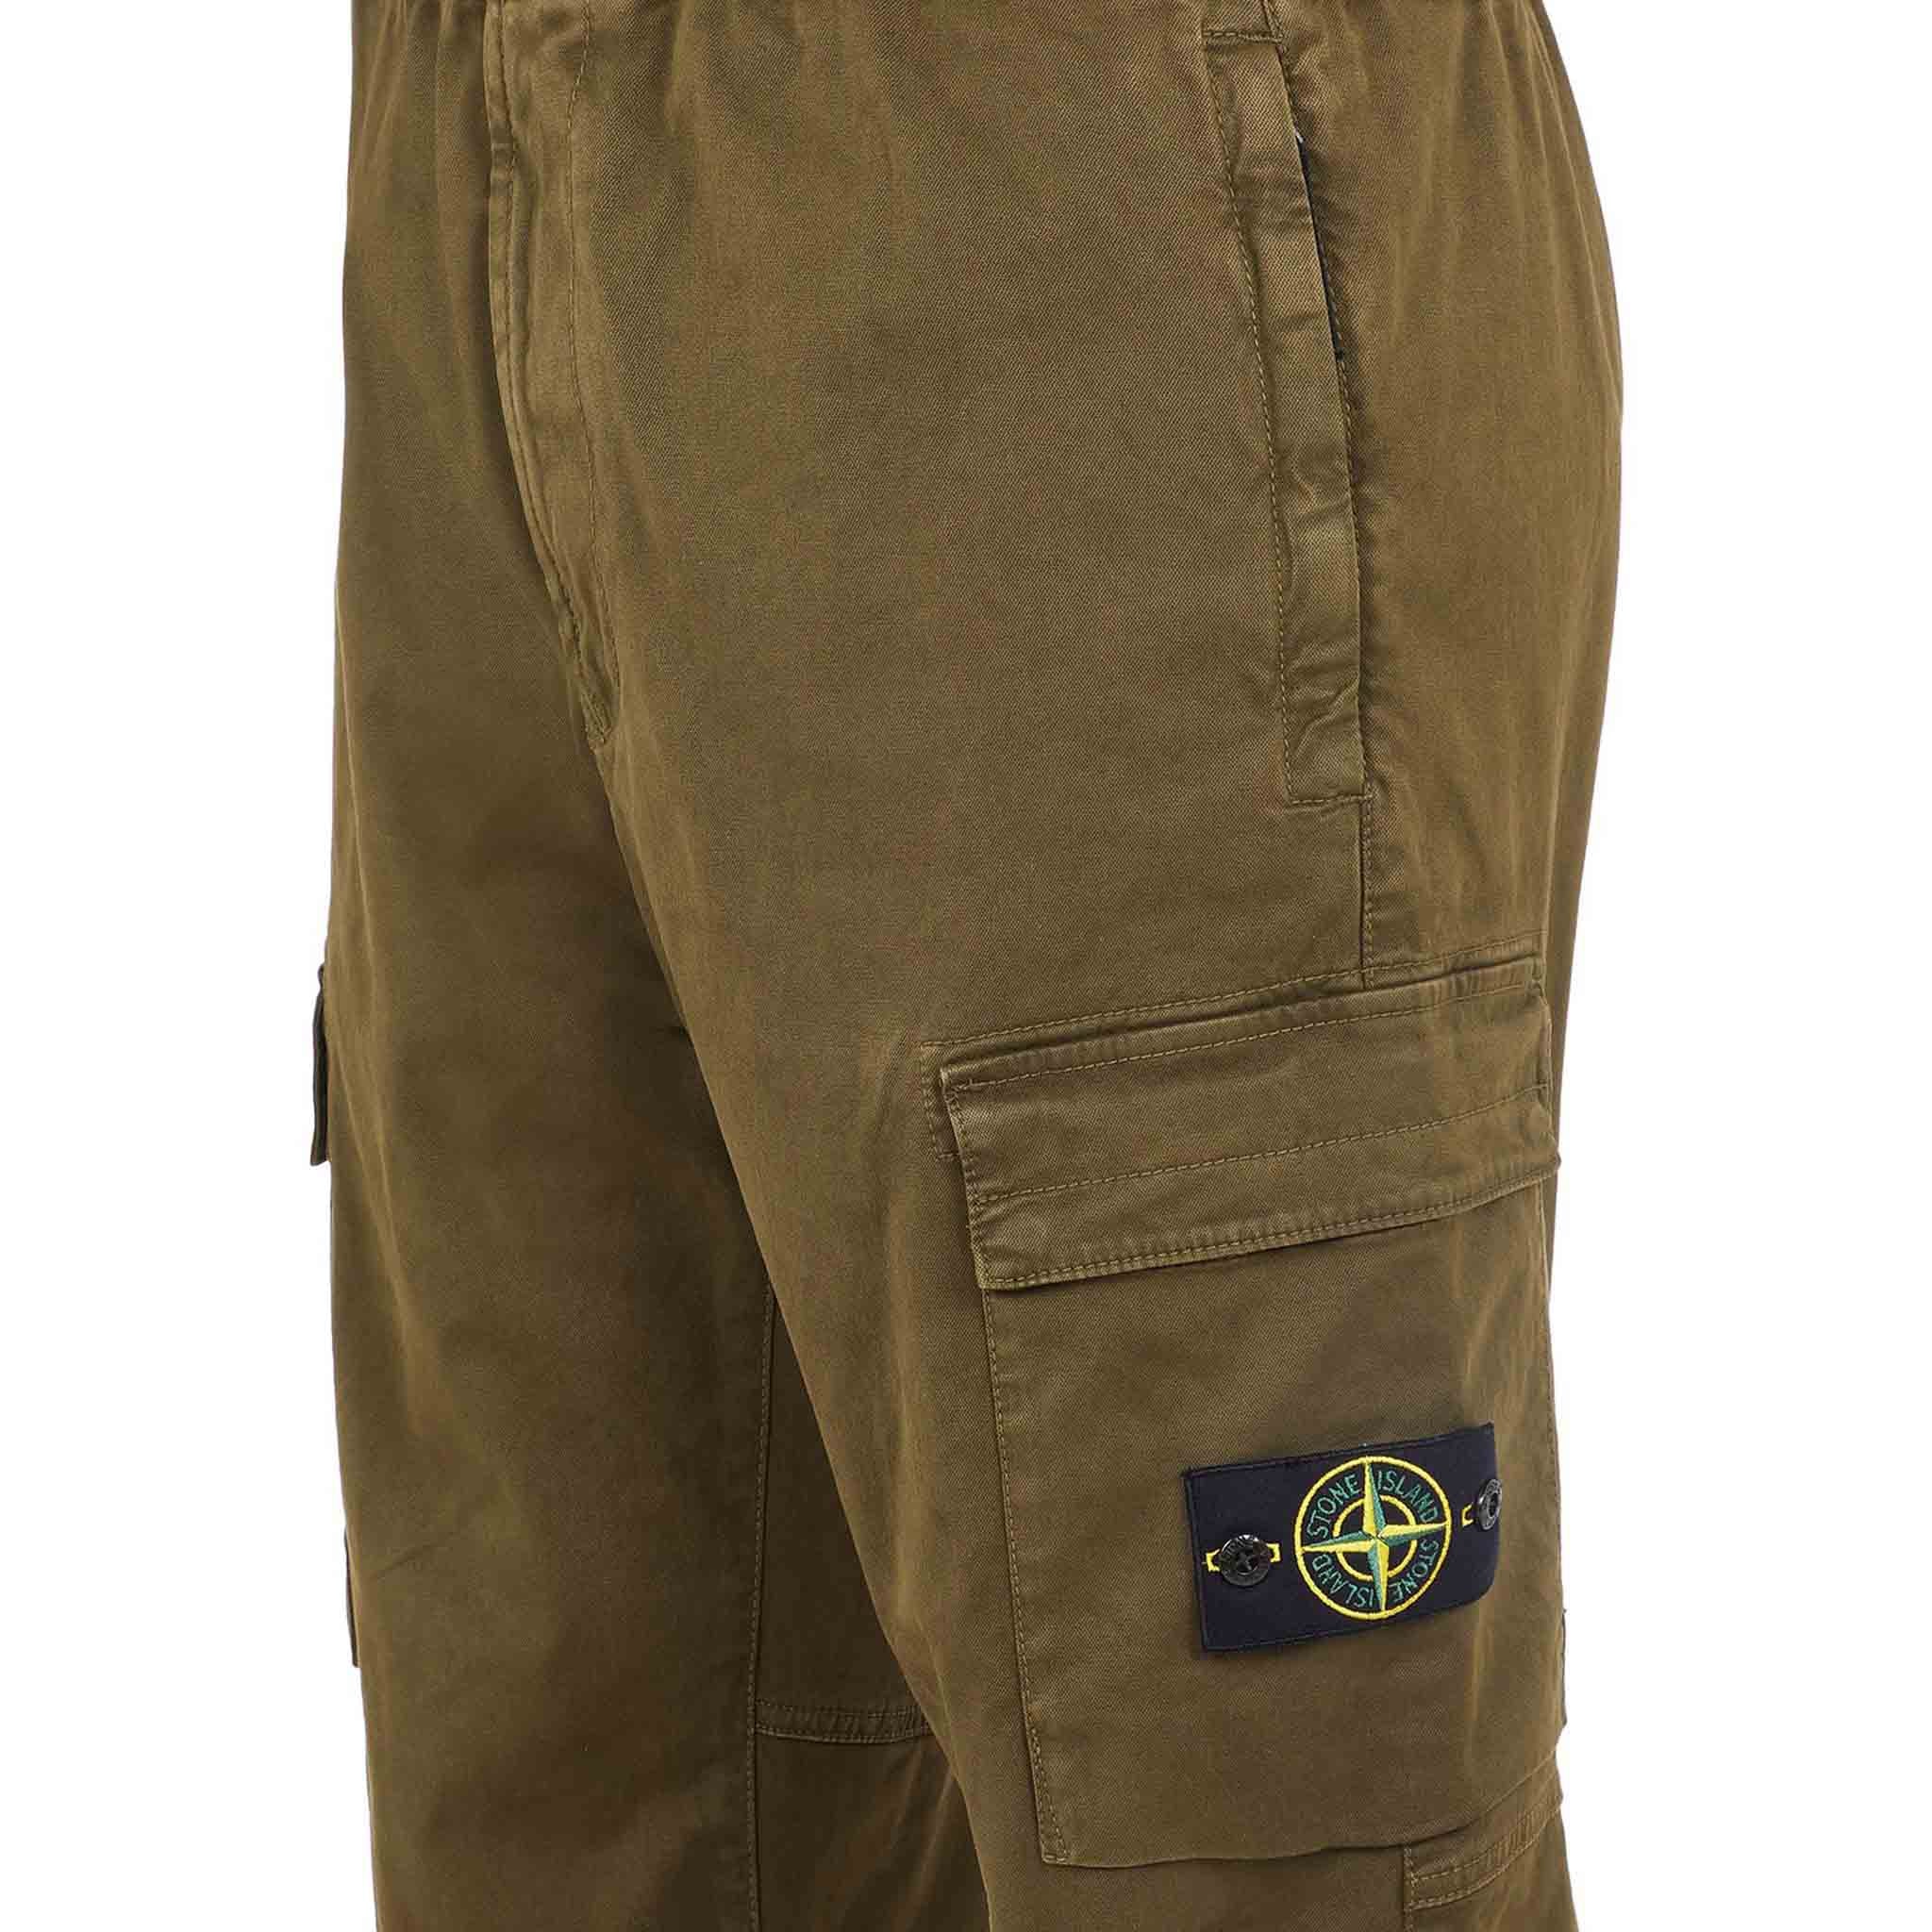 Stone Island Garment Dyed "Old" Treatment Cuffed Cargo Pants in Olive Green